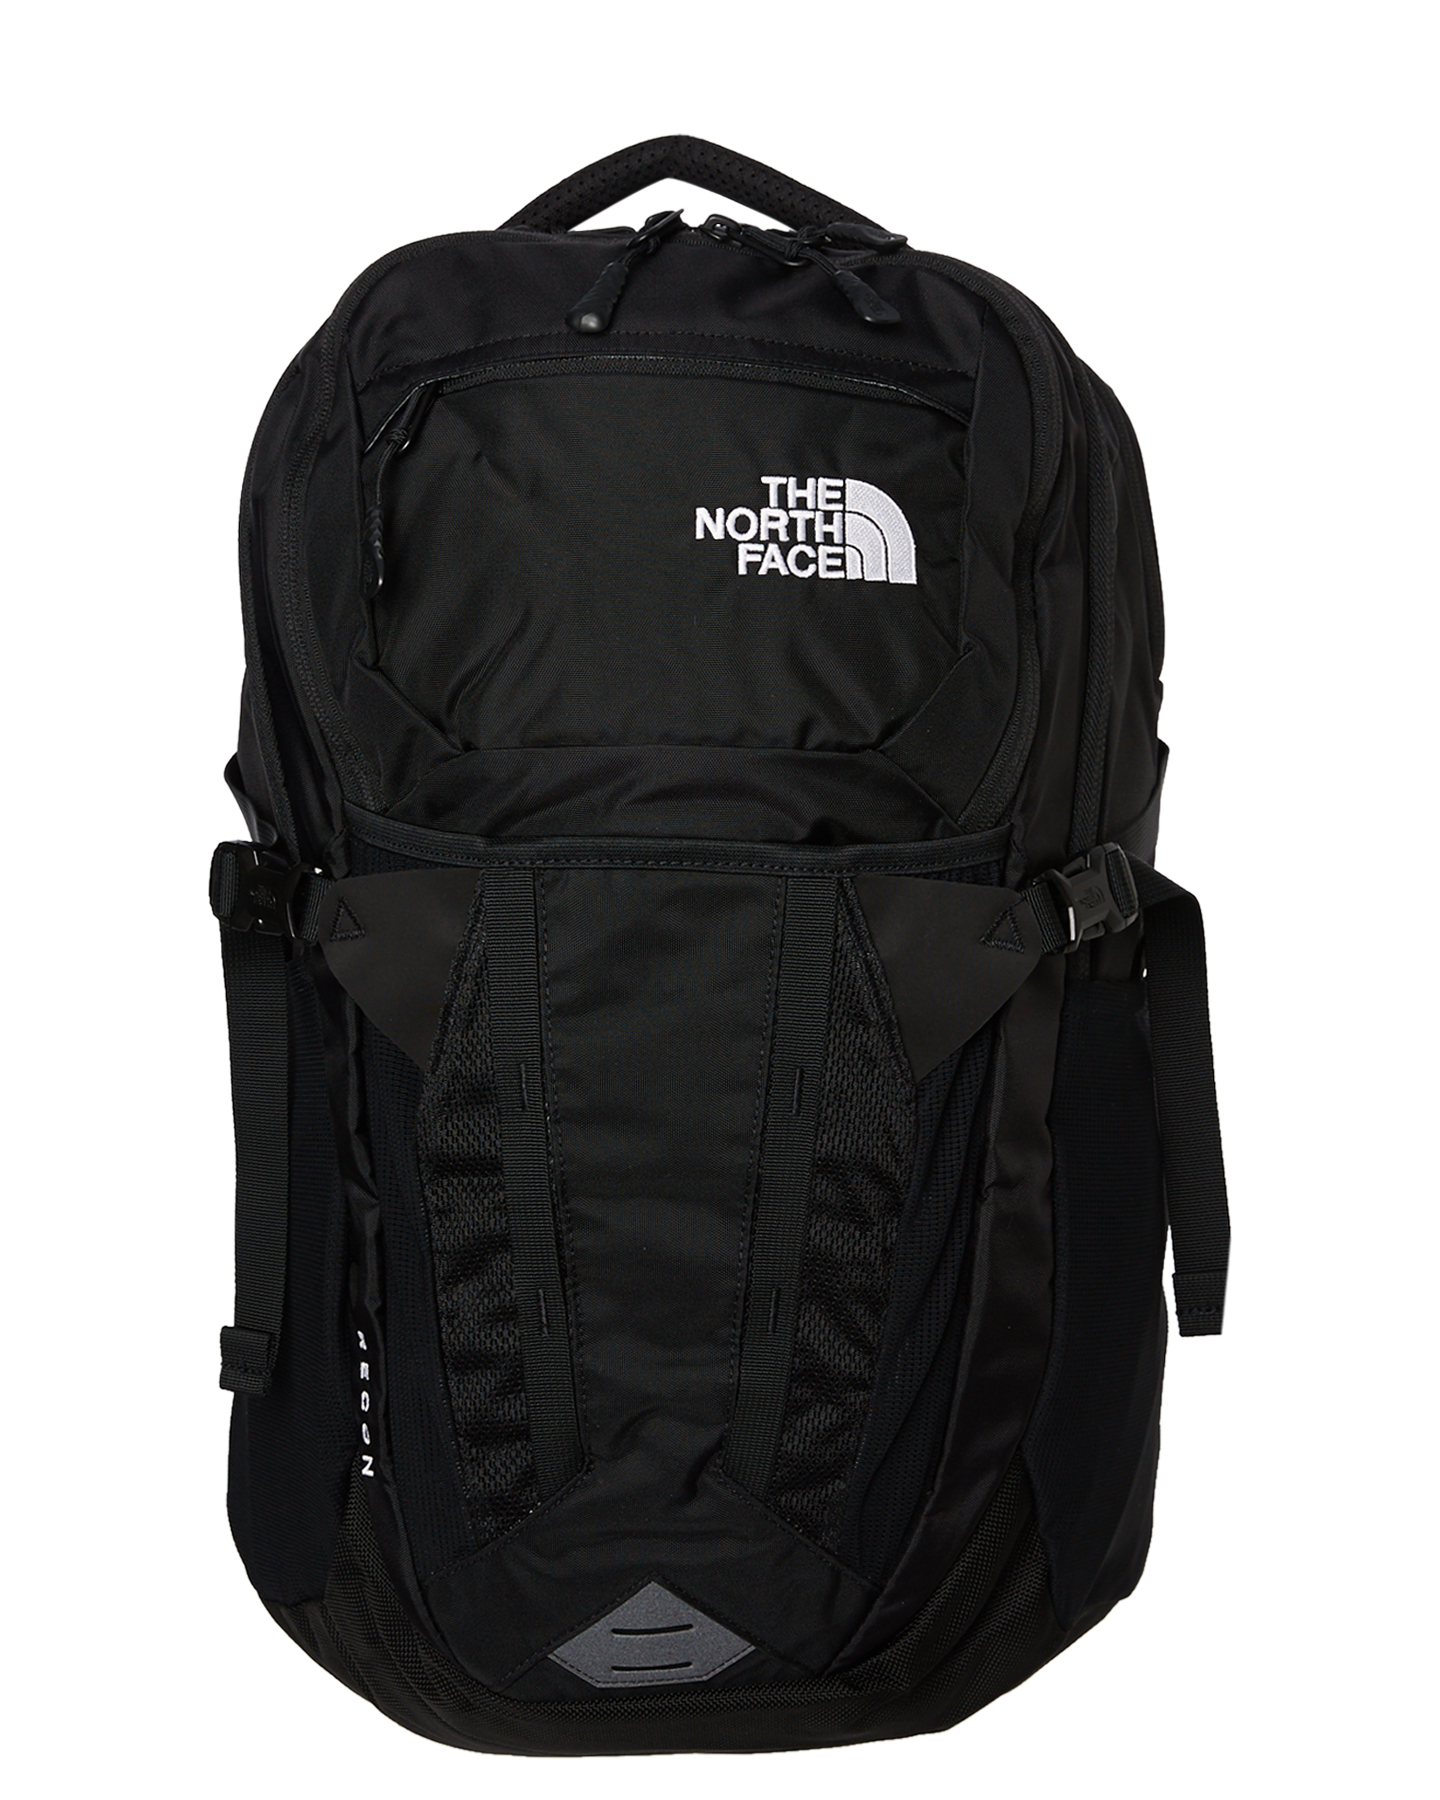 the north face backpack 30l Online 